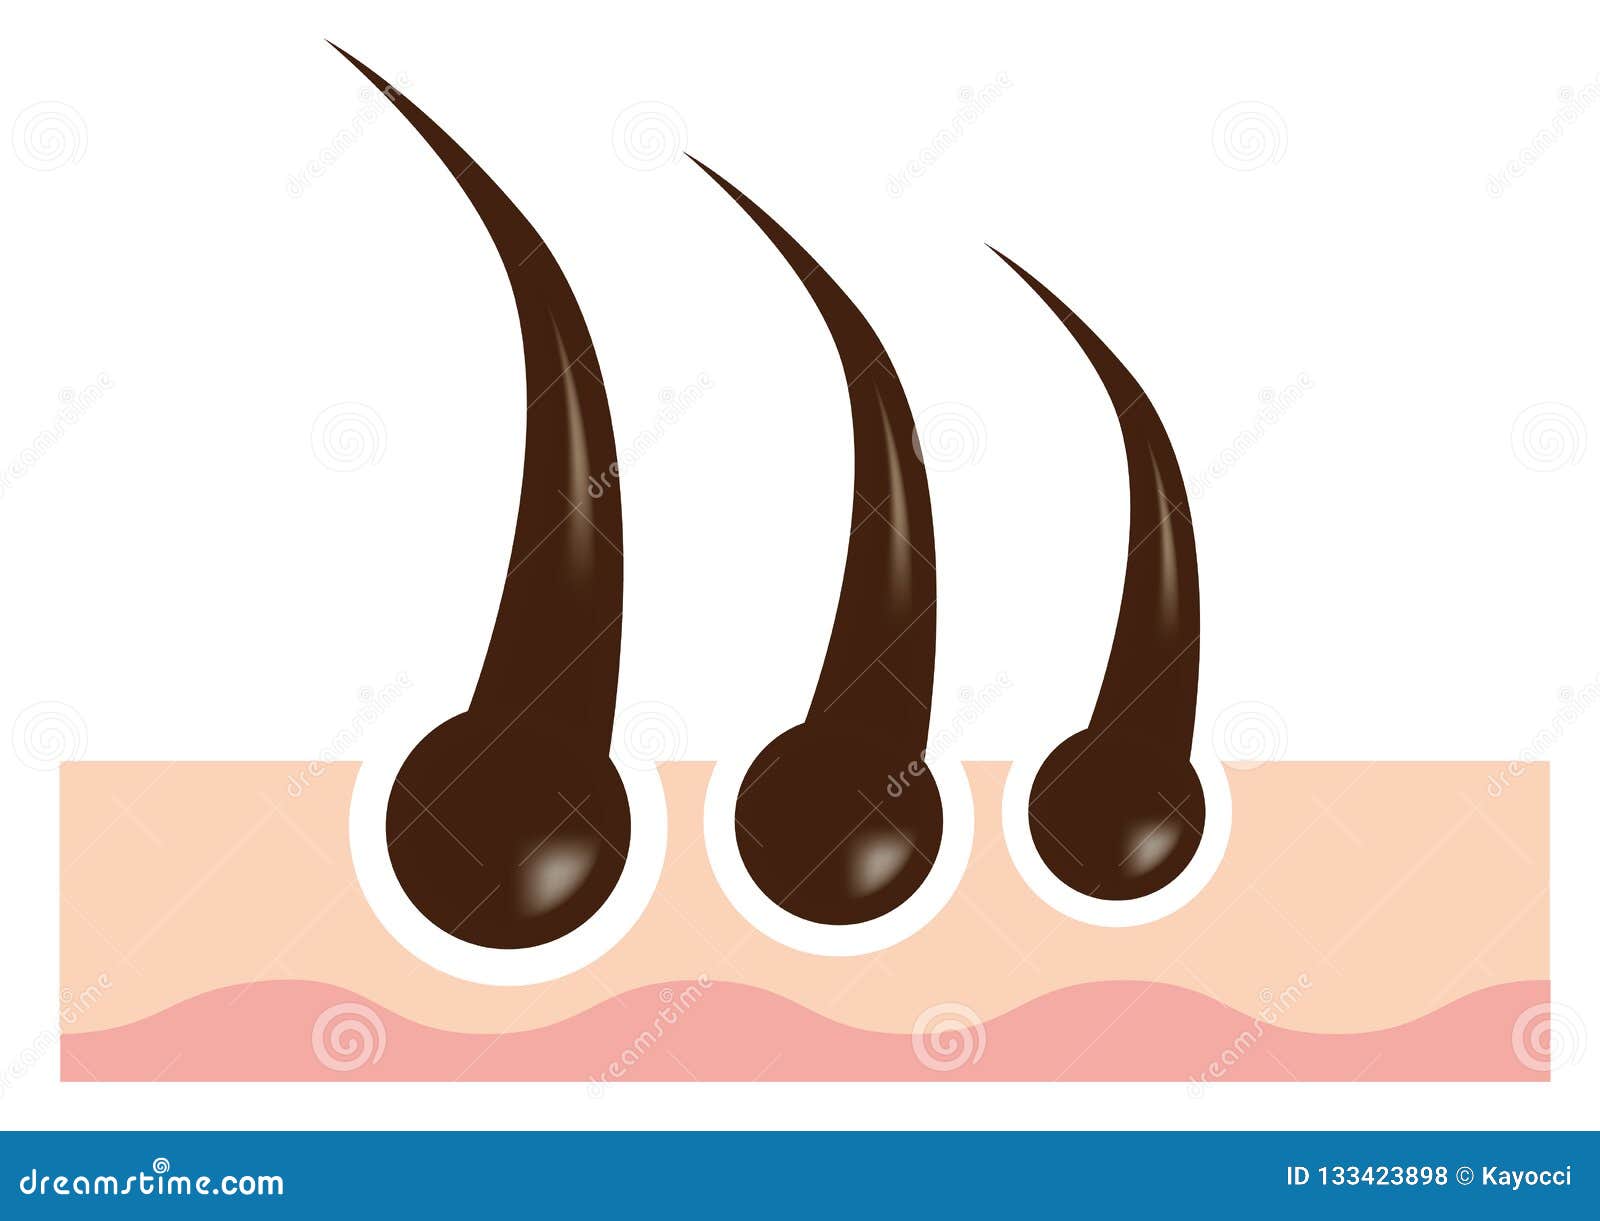 Vector Image Material of Hair Follicle Stock Vector - Illustration of care,  dermis: 133423898